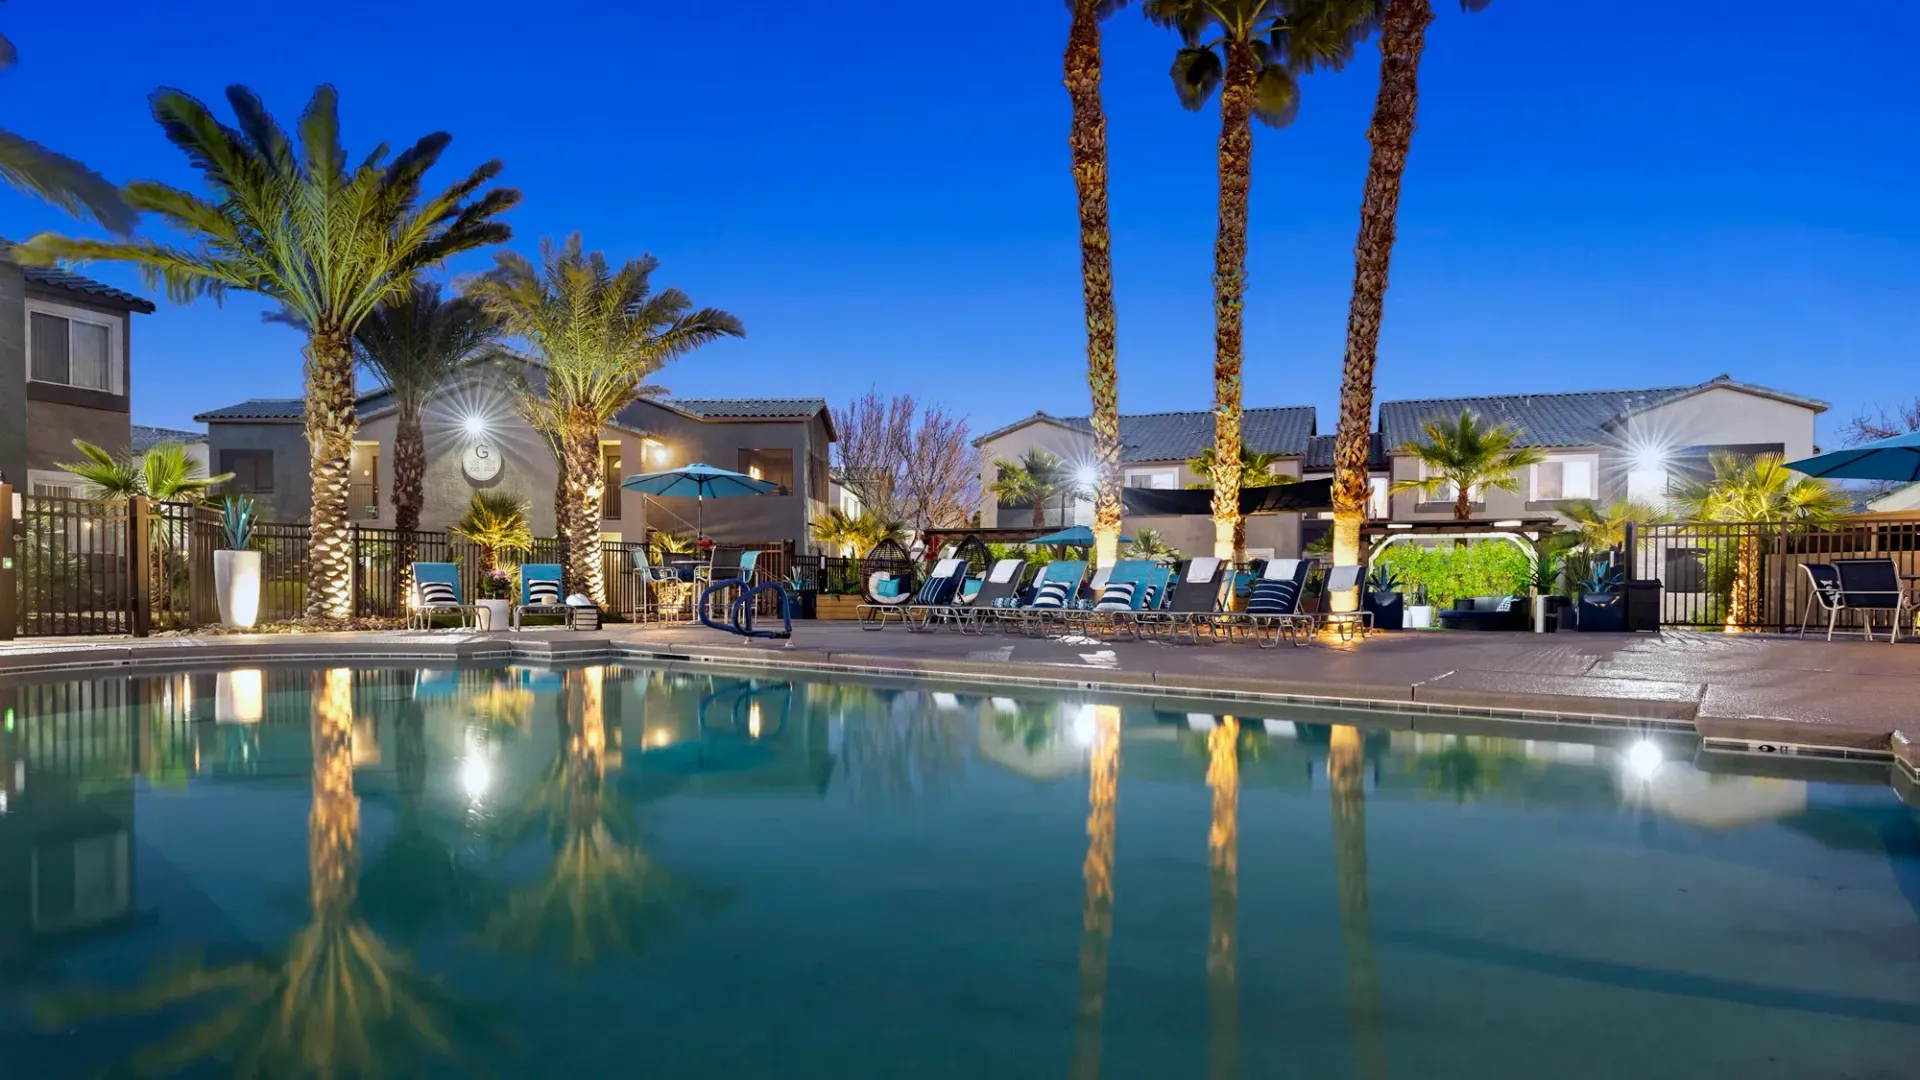 Reflections of the majestic palm trees and lights from the community reflect off the pool’s still waters at night for a calming space to unwind.